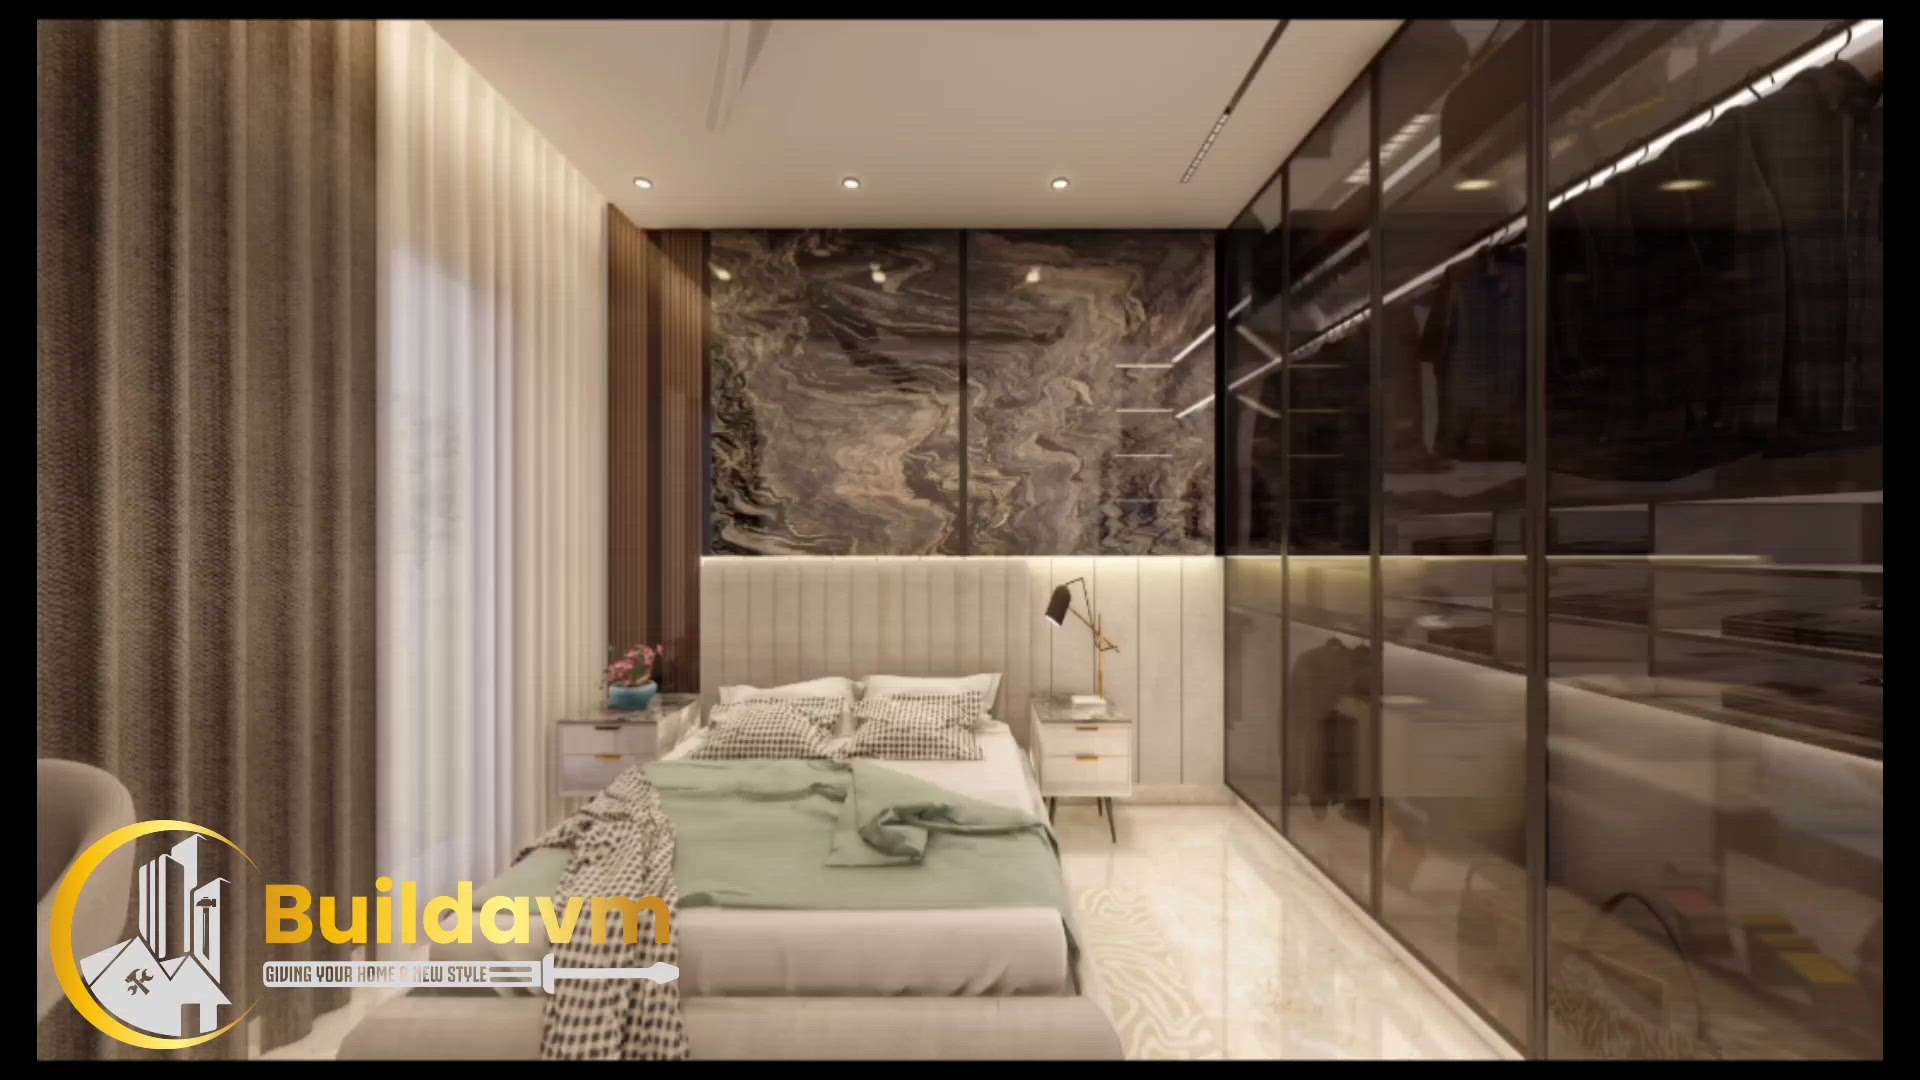 We are Providing Interior/Exterior and construction Services in
[Residential | Commercial  |Salon].

[2D Drawings | 3D work | Walkthrough]
 #InteriorDesigner  #LUXURY_INTERIOR  #MasterBedroom  #BedroomDecor  #KingsizeBedroom  #Architectural&Interior  #intwriordecoration 
Check out sample work on Instagram handle
(BUILDAVM)

Thanks & Regards
Best wishes from
Buildavm .